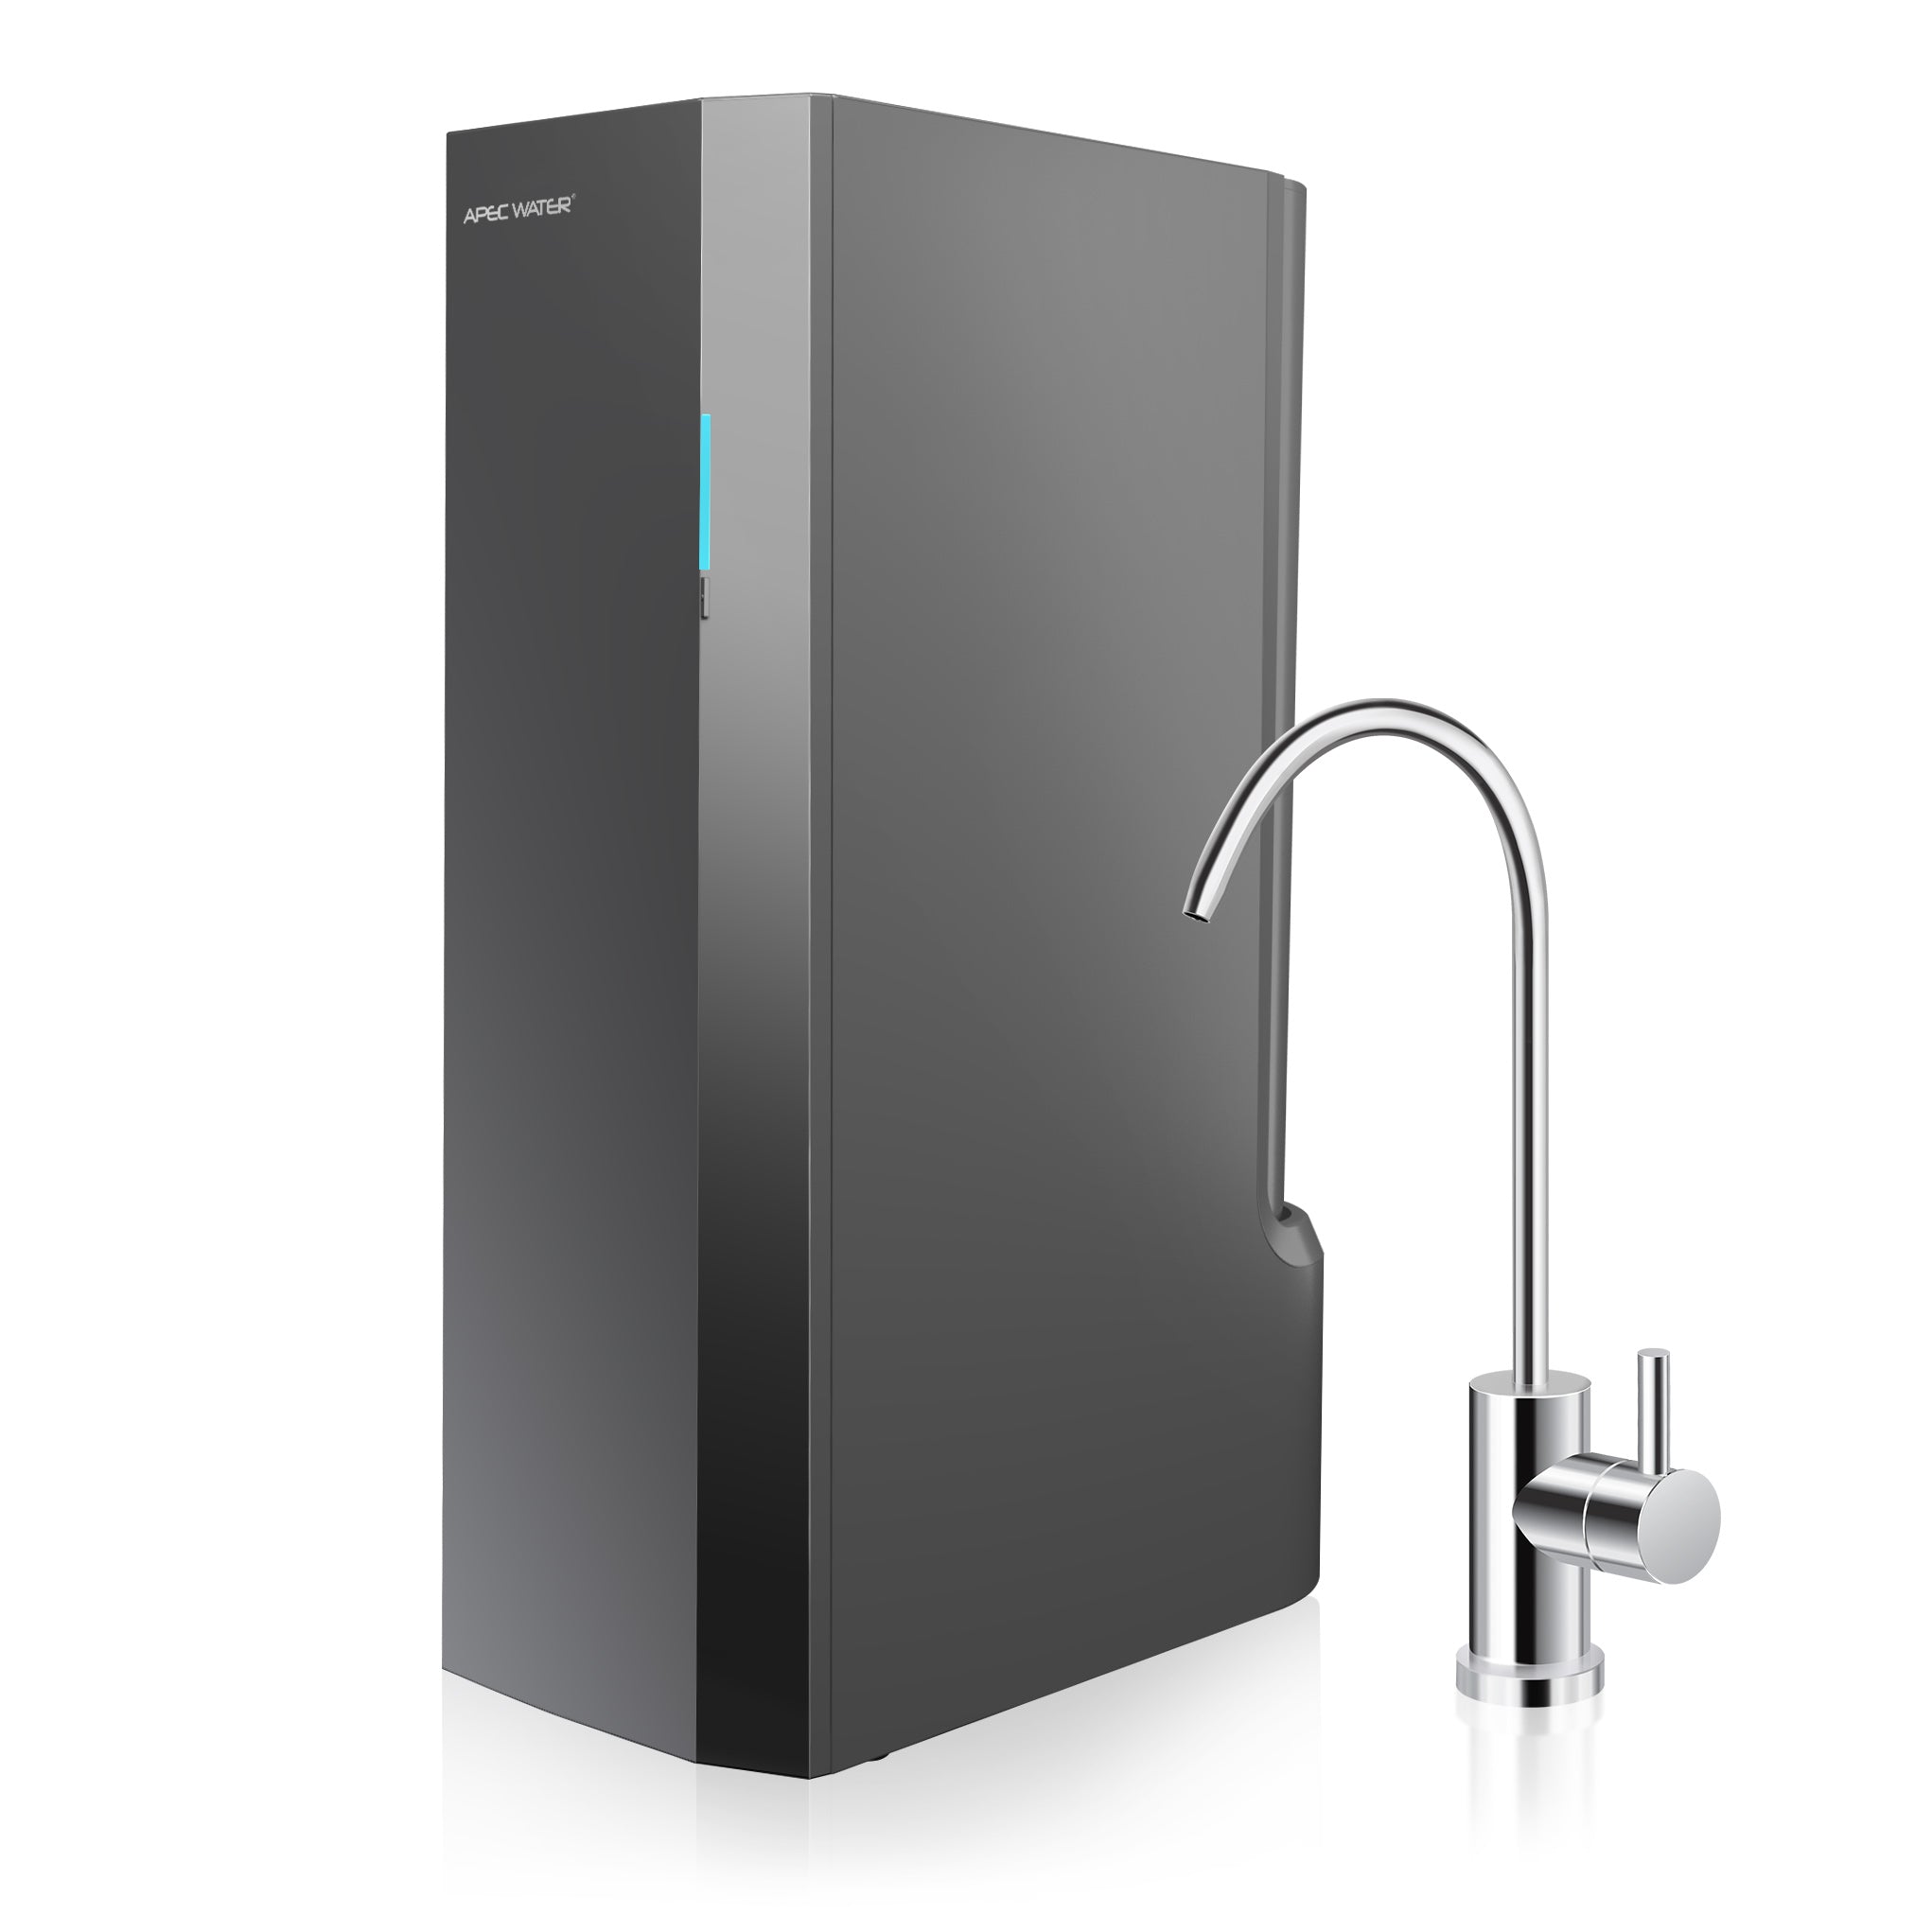 ROTL-AIO - All-in-One Tankless Premium Reverse Osmosis Water Systems